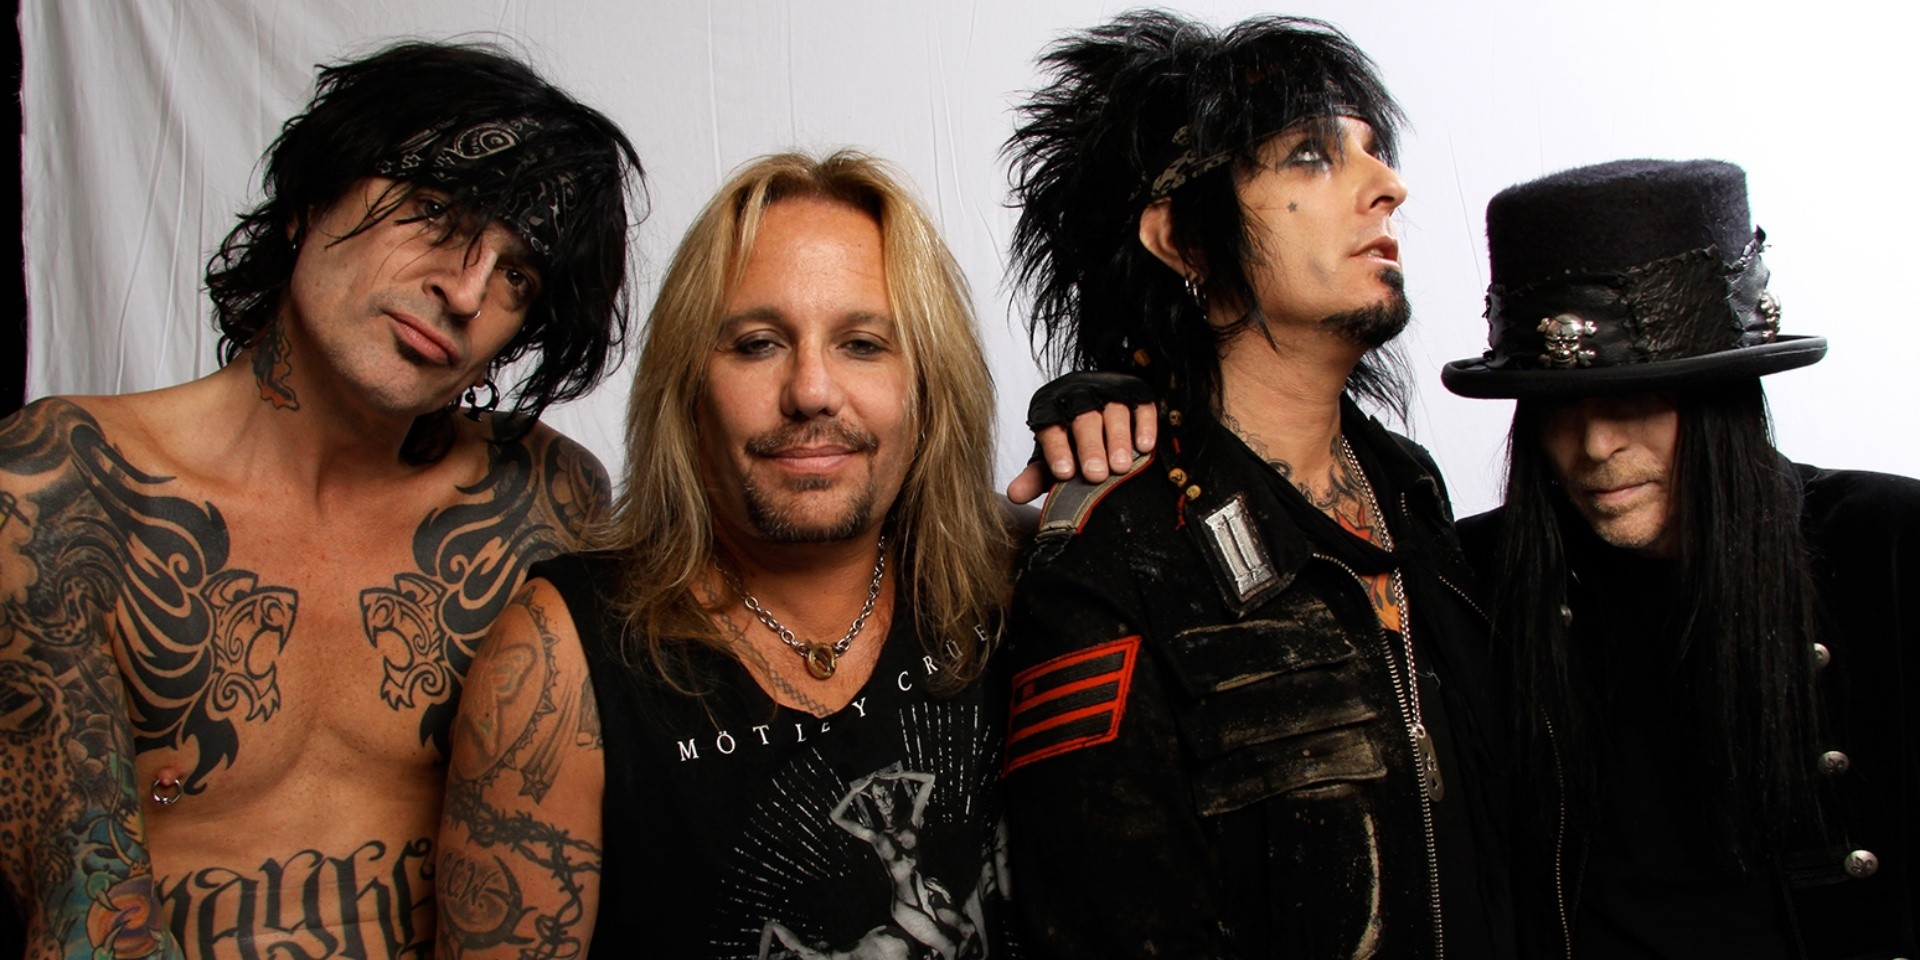 Motley Crüe shares snippet of new song from The Dirt soundtrack